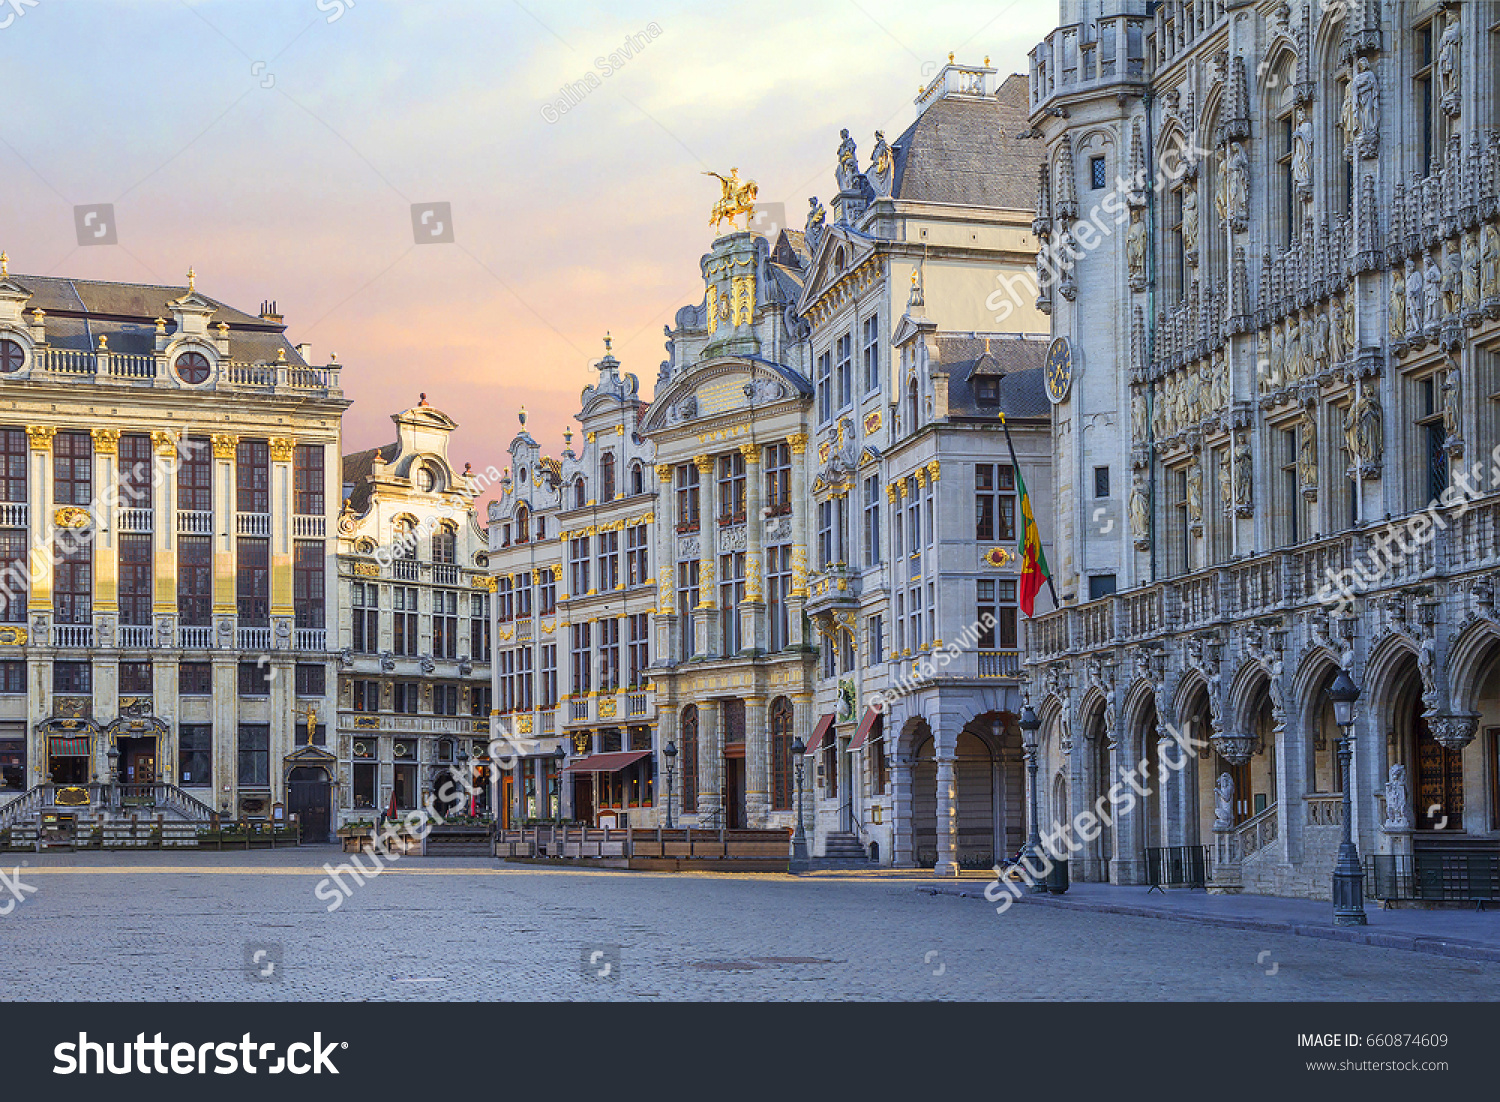 Belgium. Brussels. The Grand Place.
The Grand place is the Central square of medieval Brussels. The Grand place is one of the world's most beautiful squares, called the majestic heart of the old town. #660874609